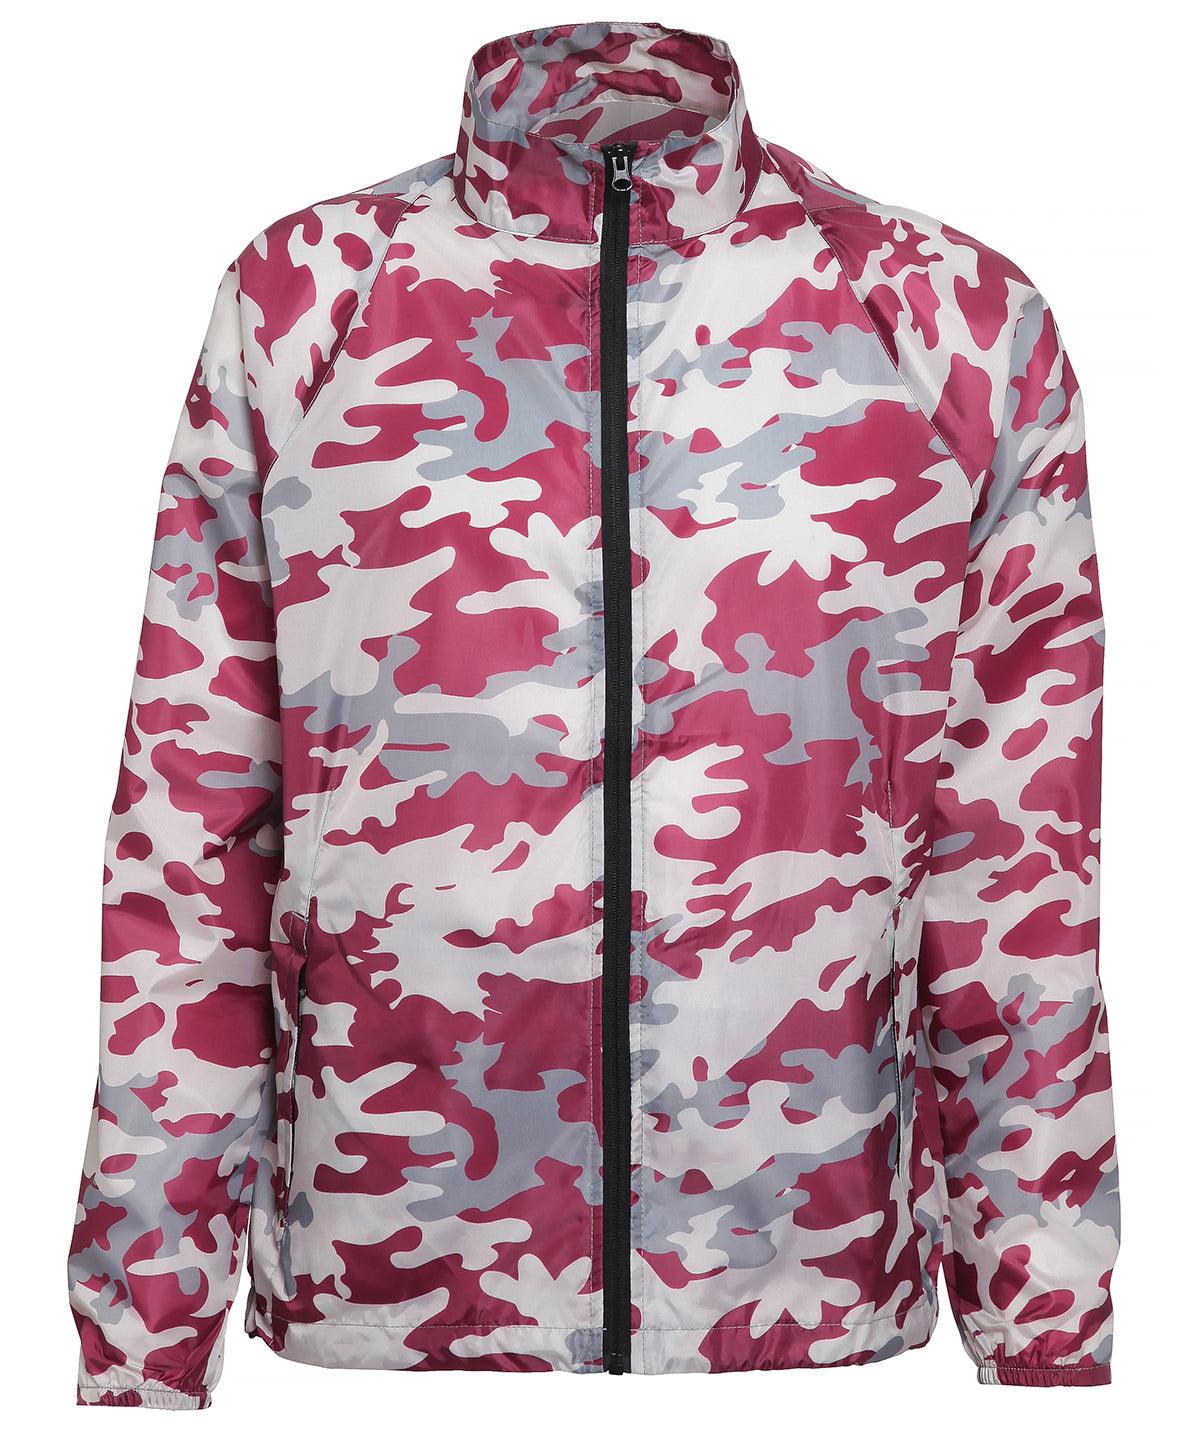 Bold Camo Burgundy - Contrast lightweight jacket Jackets 2786 Alfresco Dining, Camo, Jackets & Coats, Lightweight layers, Rebrandable, S/S 19 Trend Colours Schoolwear Centres